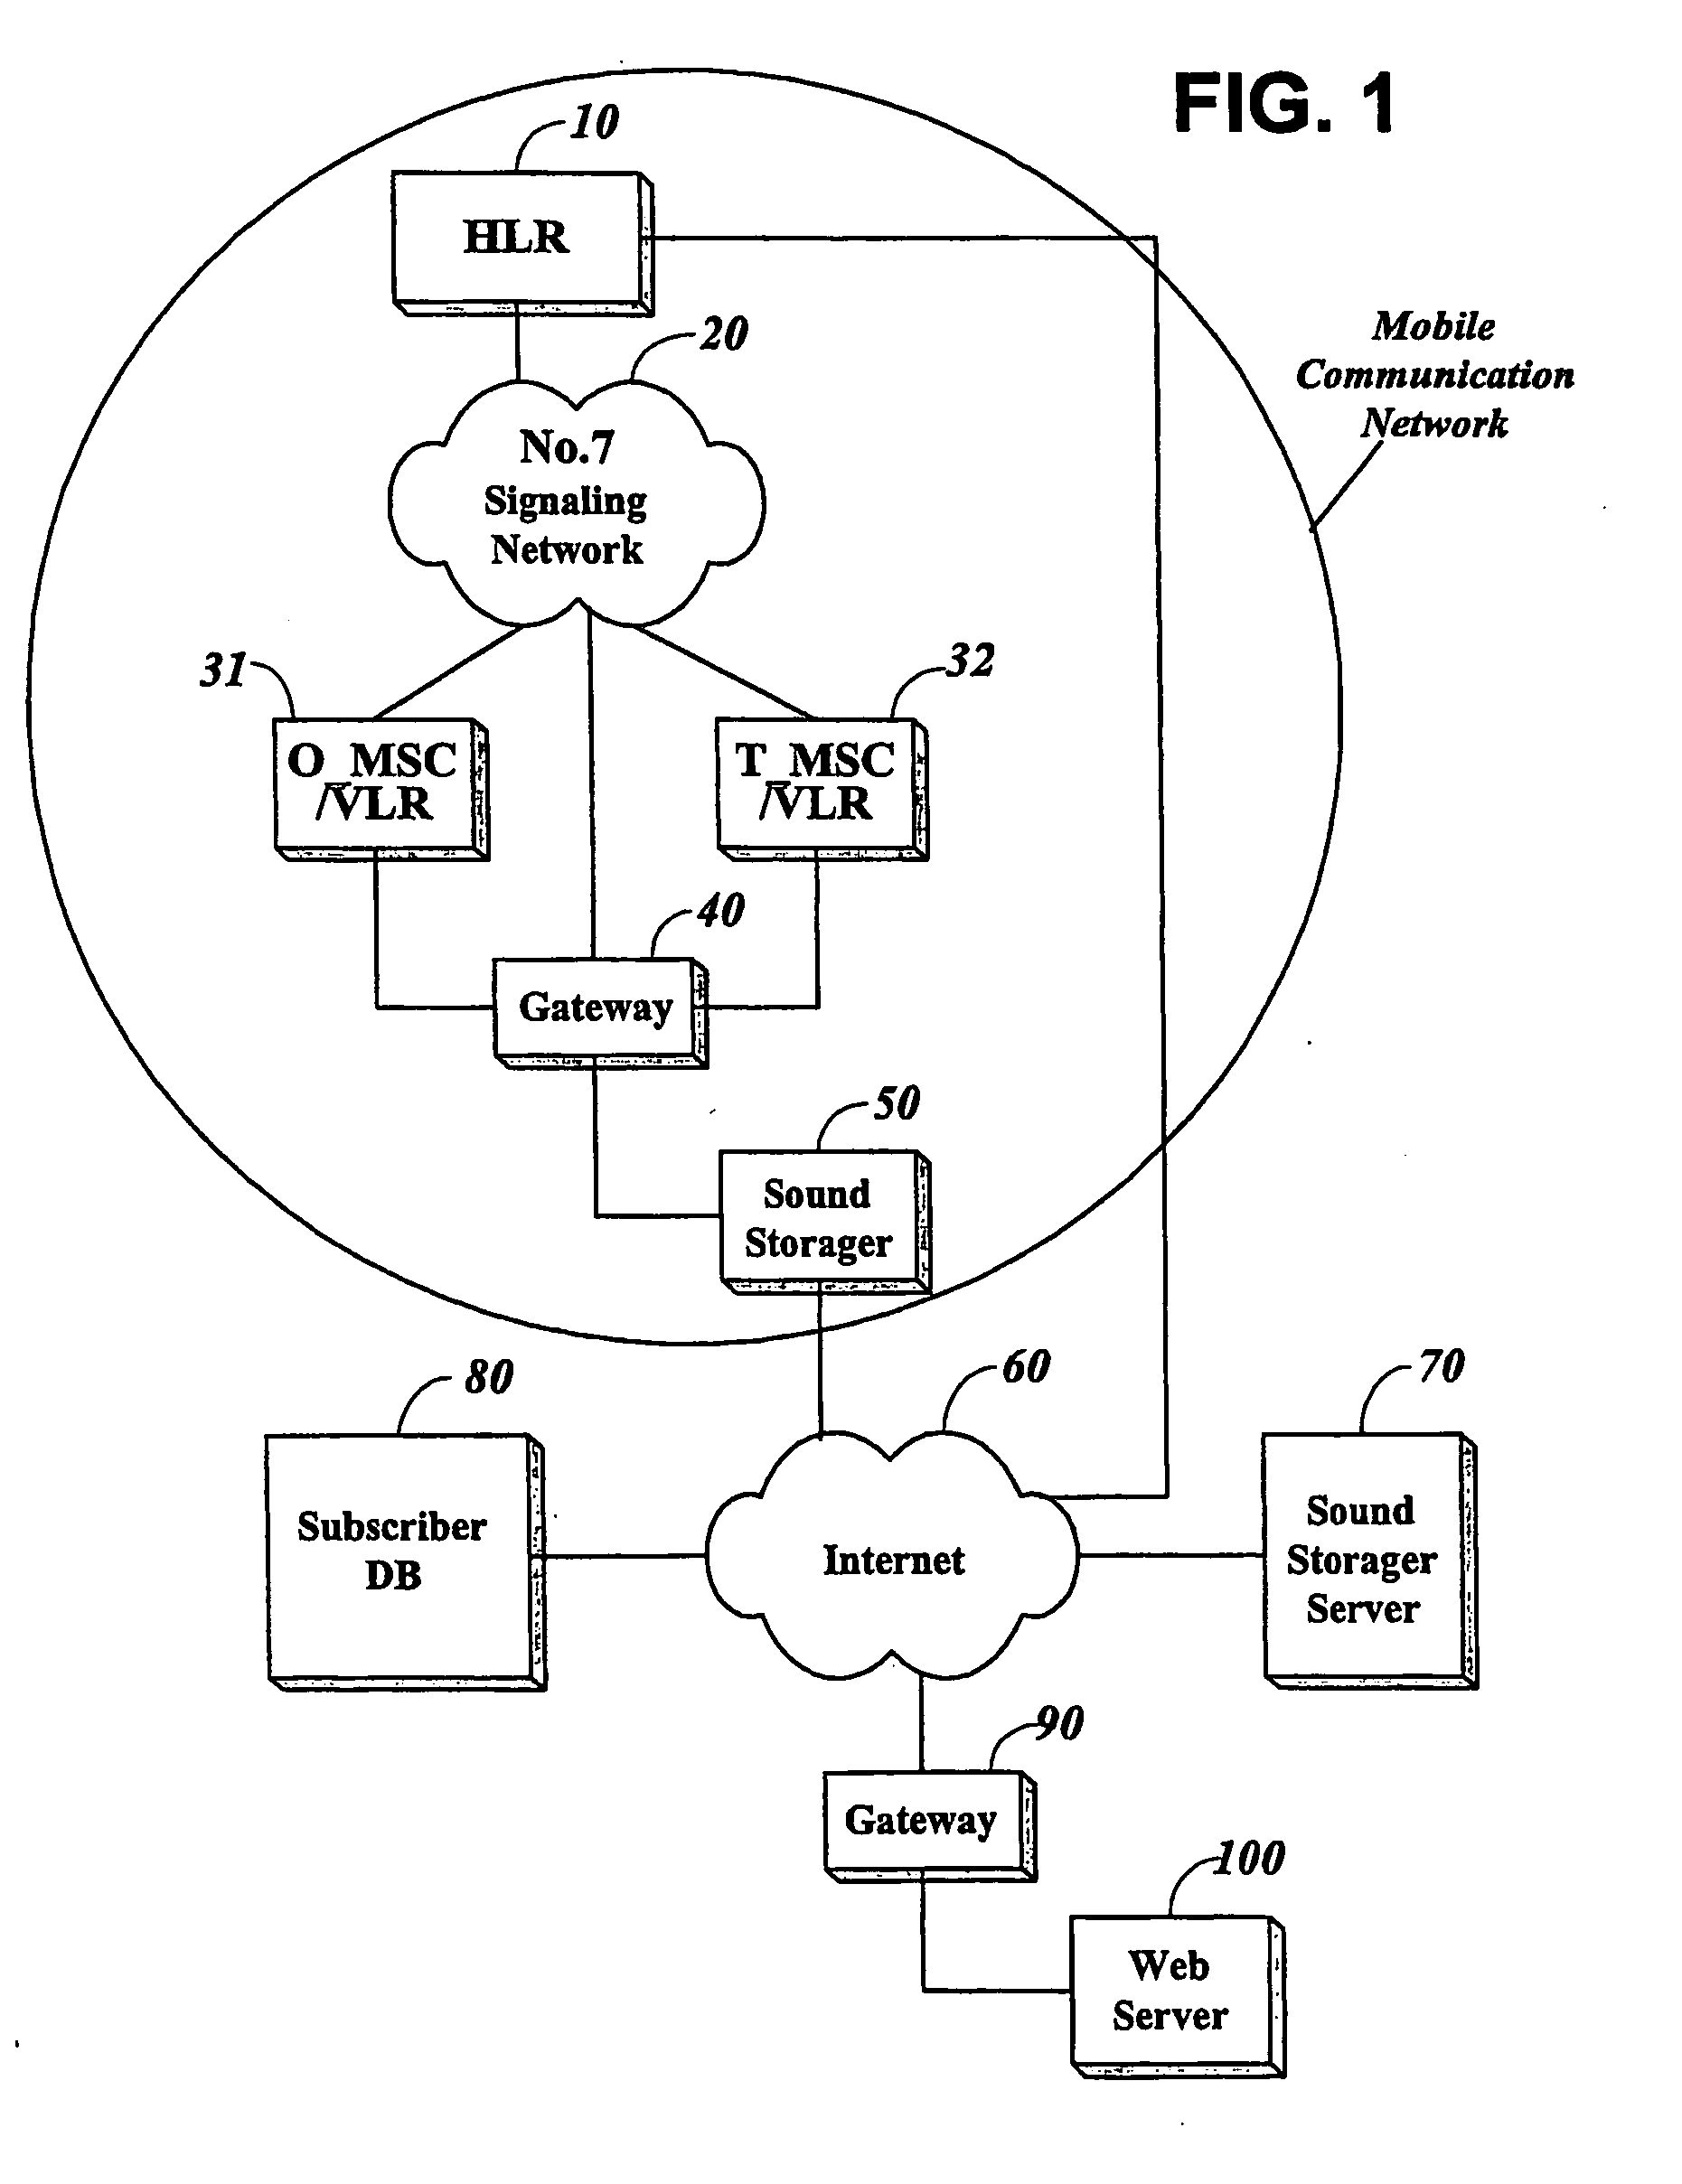 Method and apparatus for providing subscriber-based ringback tone